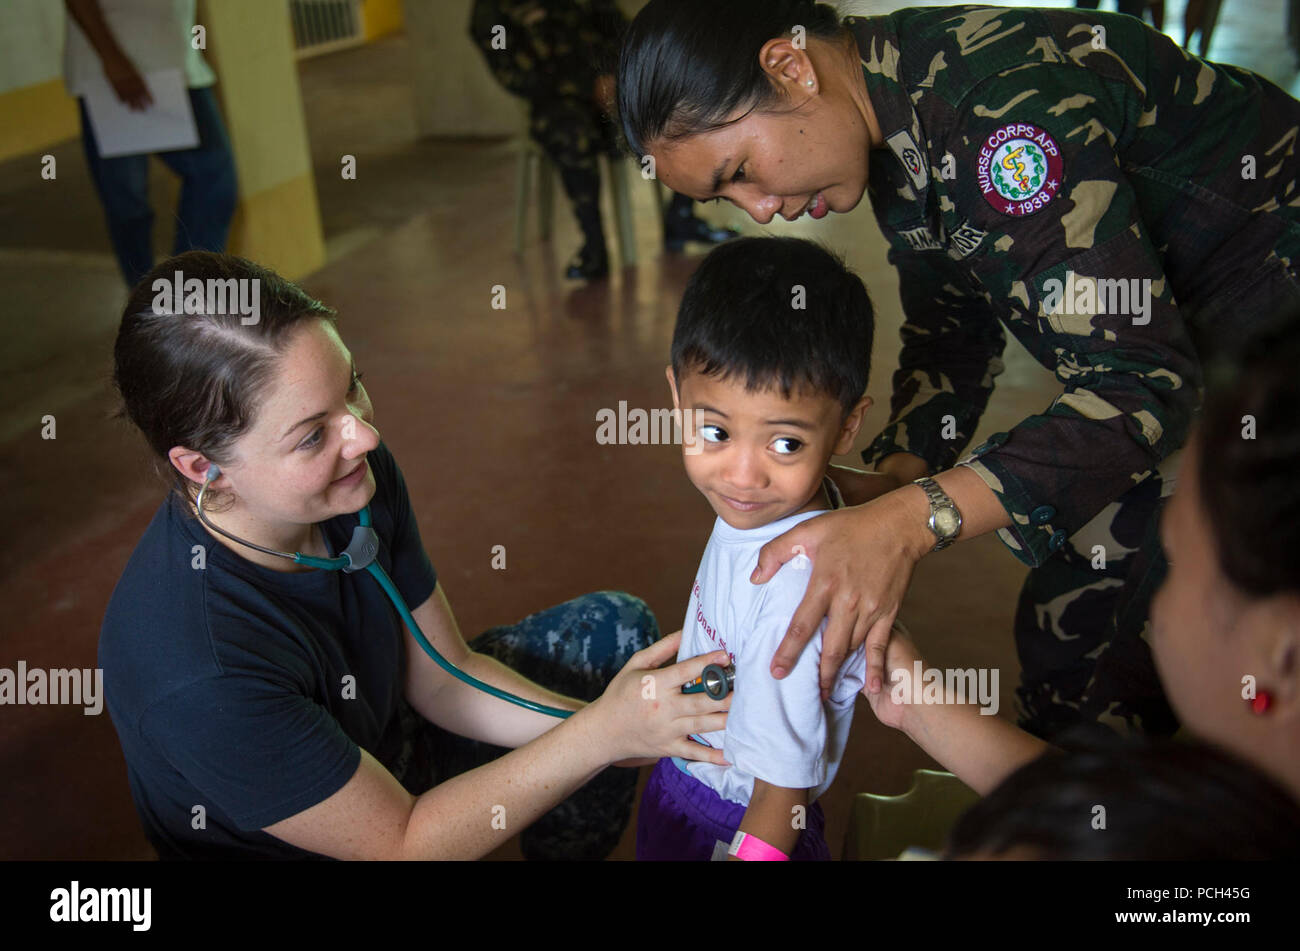 LIGAO CITY, Philippines (June 28, 2016) Lt. Noelle Cadette, a U.S. Navy nurse assigned to the hospital ship USNS Mercy (T-AH 19), left, and 2nd Lt. Irish F. Banaybanay, from the Philippine Nurse Corps, listen to a child's lungs at Ligao West Central Elementary School during Pacific Partnership 2016. Cadette, from Norwalk, Conn., was at the school as part of a cooperative health engagement where Pacific Partnership 2016 personnel attached to Mercy and members of the Armed Forces of the Philippines spent the day educating people on health care, hygiene and nutrition. Participants also provided d Stock Photo